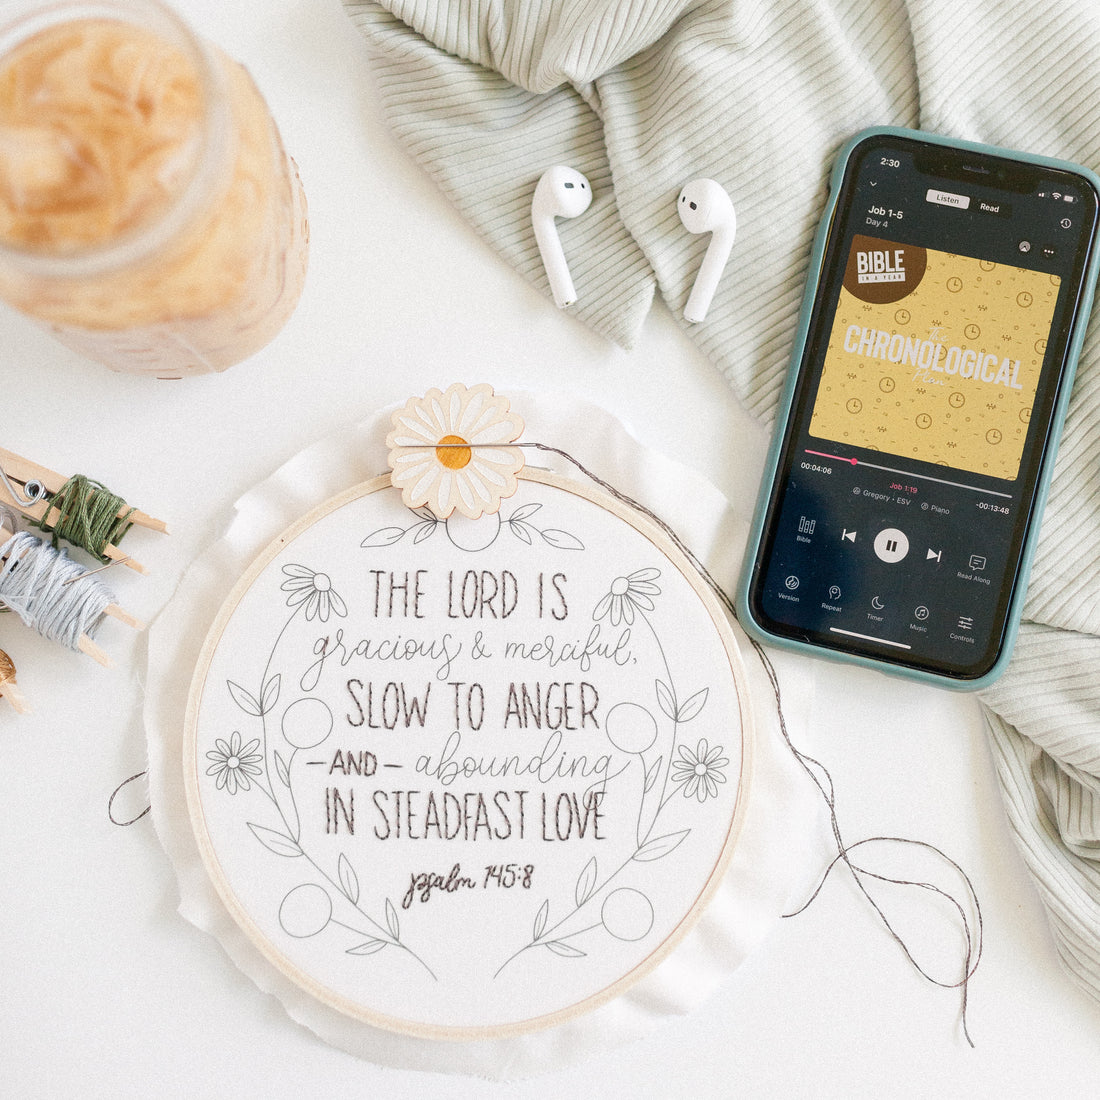 3 Things To Do While You Stitch—Listen (1/3) 🎧